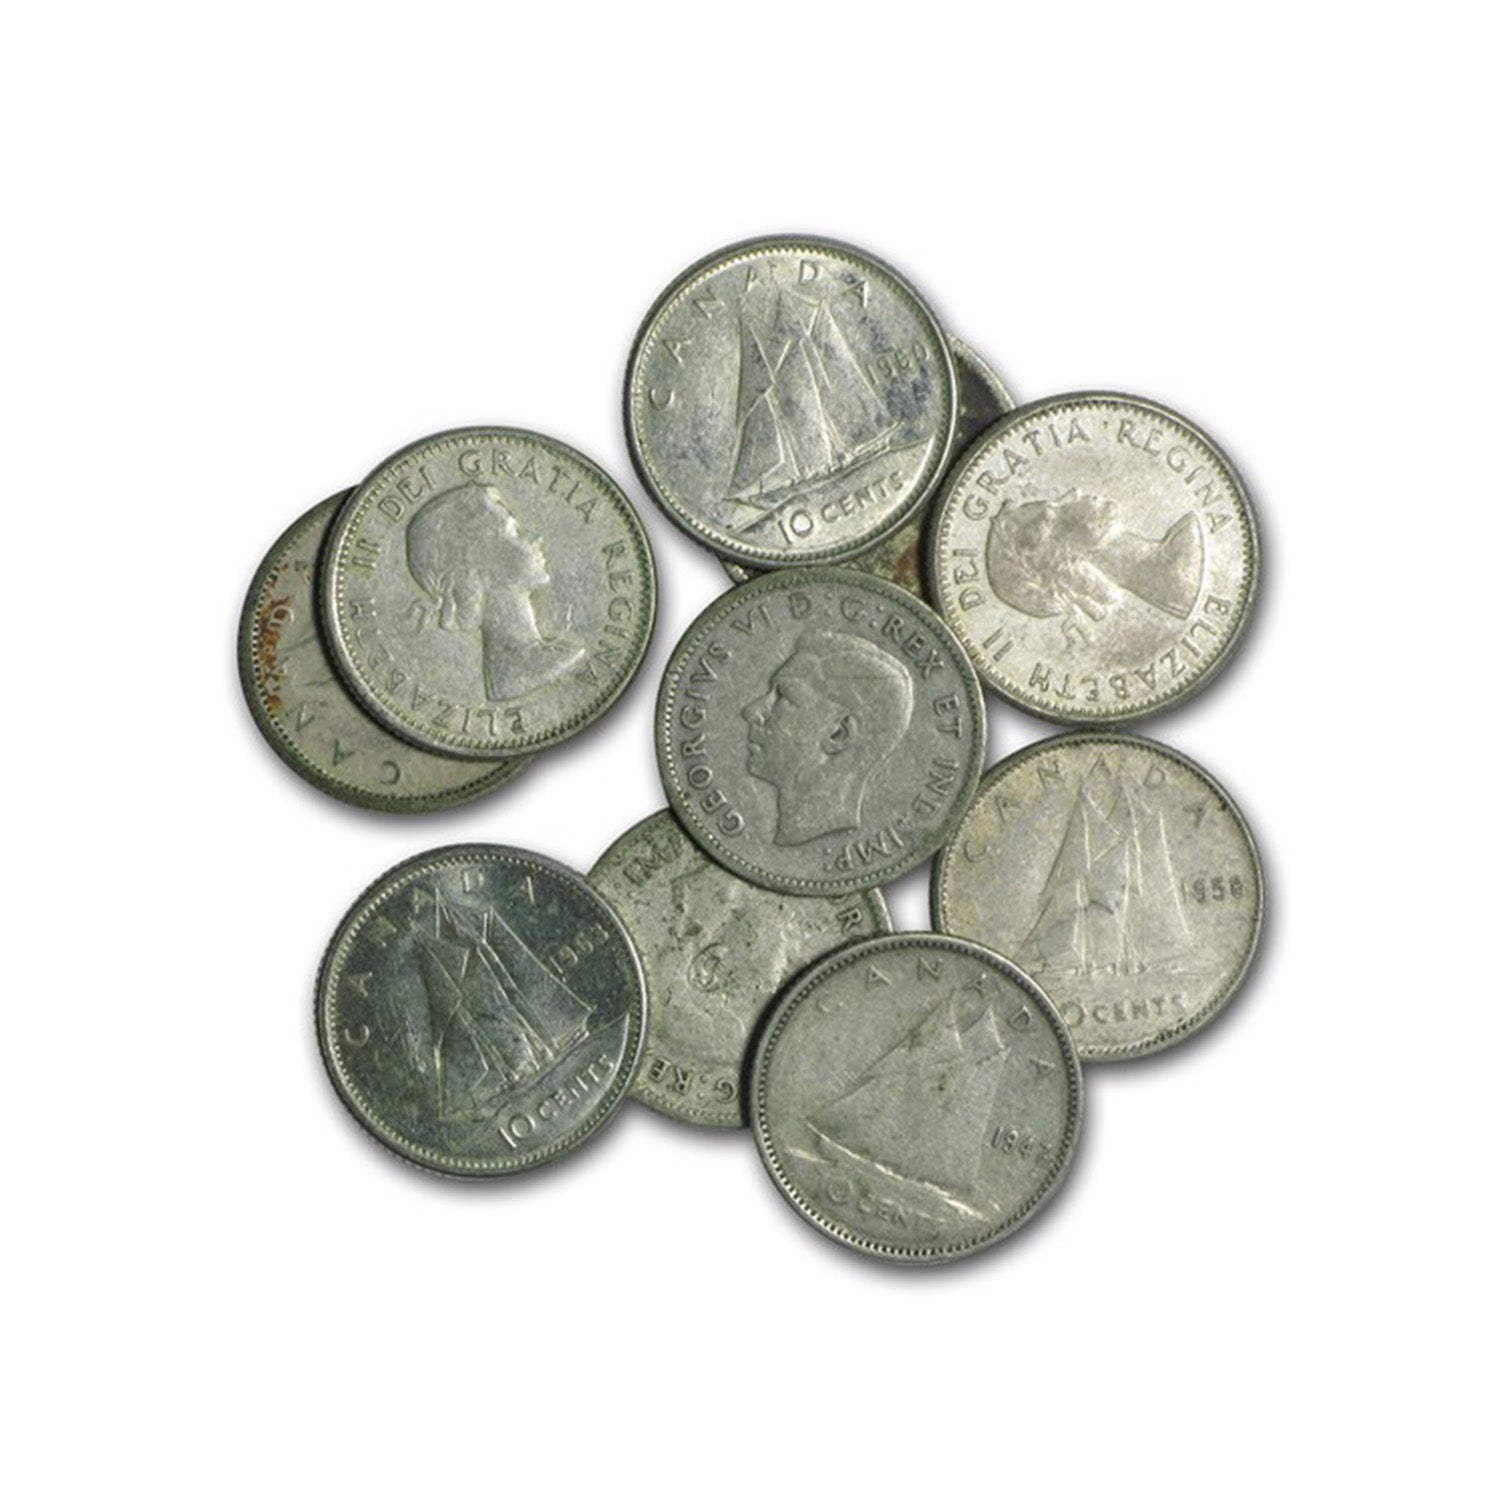 80% Silver Canadian Coins Average Circulated ($1 Face Value)